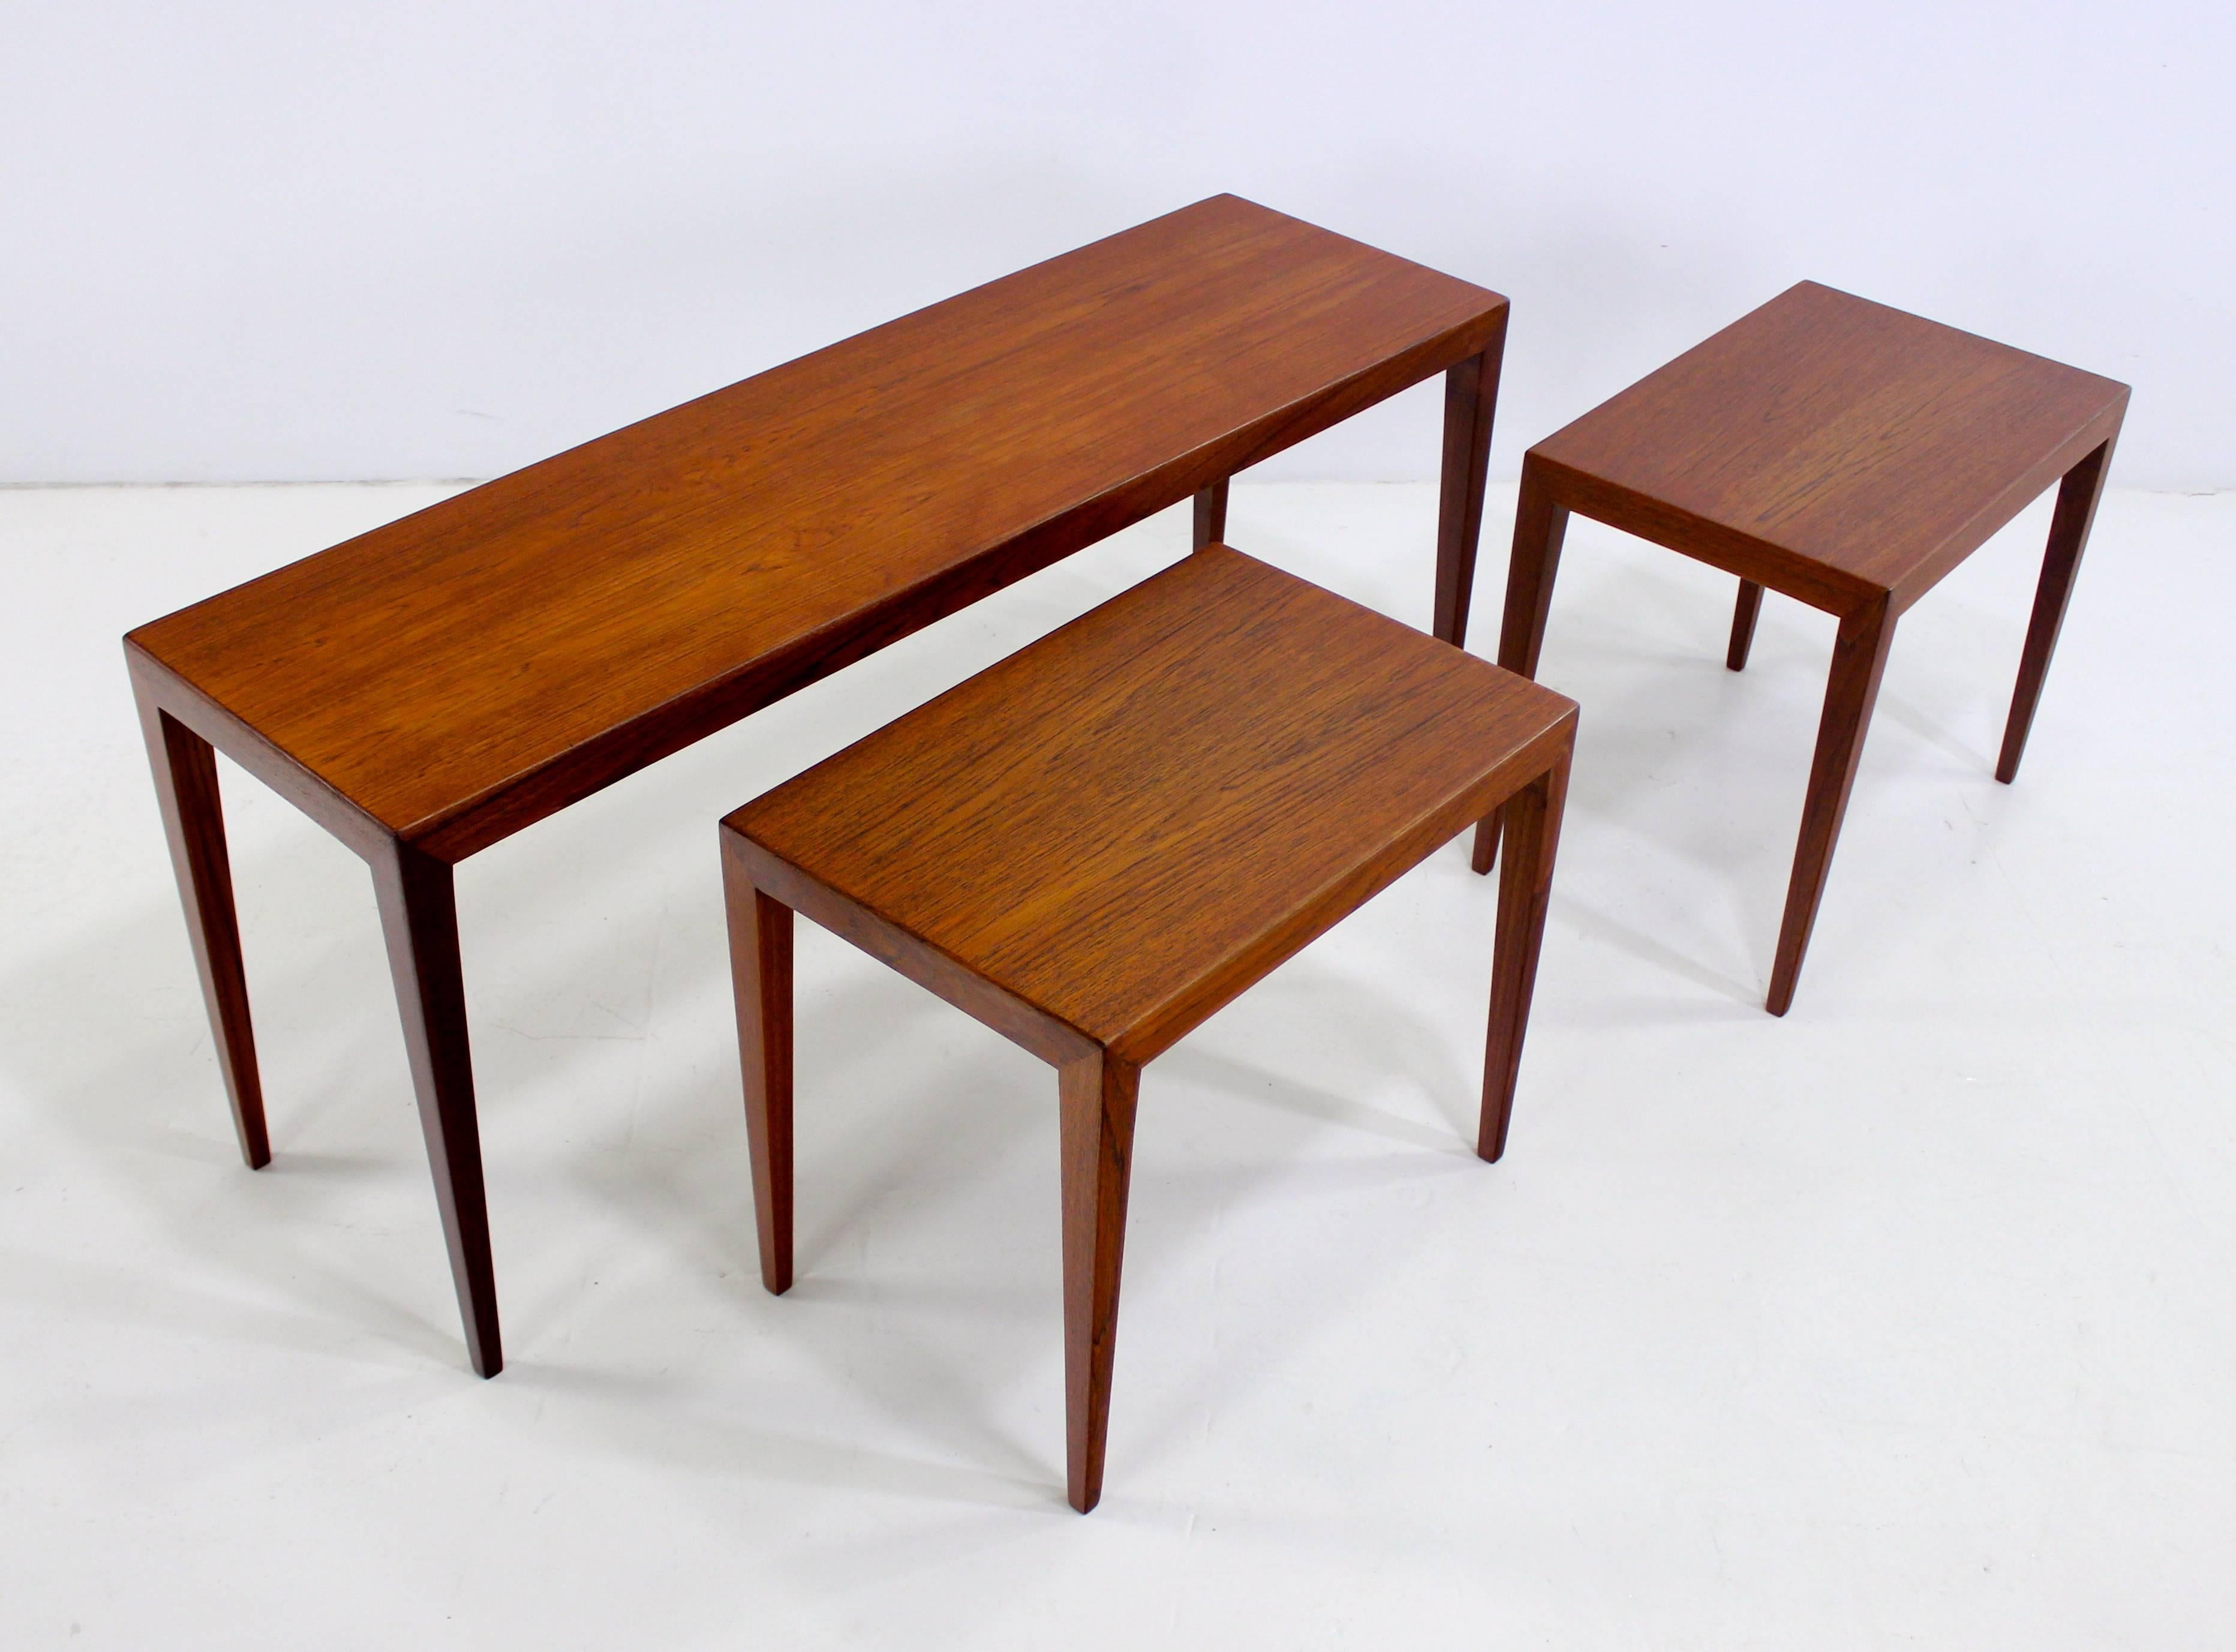 Set of Three Danish Modern Teak Nesting Tables Designed by Severin Hansen In Excellent Condition For Sale In Portland, OR